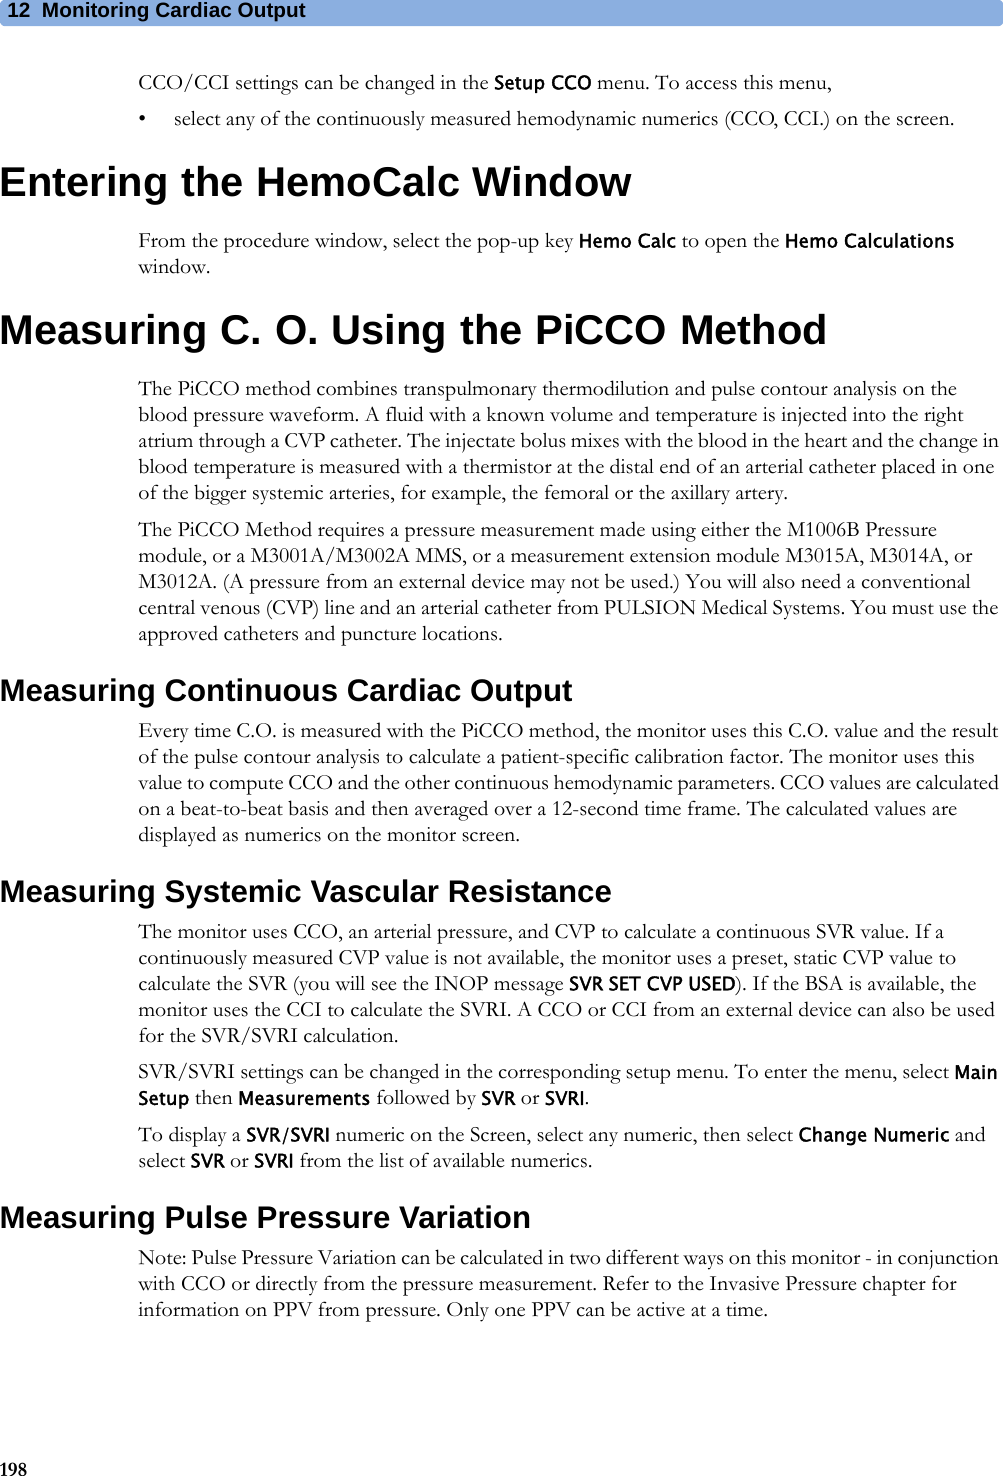 12 Monitoring Cardiac Output198CCO/CCI settings can be changed in the Setup CCO menu. To access this menu,• select any of the continuously measured hemodynamic numerics (CCO, CCI.) on the screen.Entering the HemoCalc WindowFrom the procedure window, select the pop-up key Hemo Calc to open the Hemo Calculations window.Measuring C. O. Using the PiCCO MethodThe PiCCO method combines transpulmonary thermodilution and pulse contour analysis on the blood pressure waveform. A fluid with a known volume and temperature is injected into the right atrium through a CVP catheter. The injectate bolus mixes with the blood in the heart and the change in blood temperature is measured with a thermistor at the distal end of an arterial catheter placed in one of the bigger systemic arteries, for example, the femoral or the axillary artery.The PiCCO Method requires a pressure measurement made using either the M1006B Pressure module, or a M3001A/M3002A MMS, or a measurement extension module M3015A, M3014A, or M3012A. (A pressure from an external device may not be used.) You will also need a conventional central venous (CVP) line and an arterial catheter from PULSION Medical Systems. You must use the approved catheters and puncture locations.Measuring Continuous Cardiac OutputEvery time C.O. is measured with the PiCCO method, the monitor uses this C.O. value and the result of the pulse contour analysis to calculate a patient-specific calibration factor. The monitor uses this value to compute CCO and the other continuous hemodynamic parameters. CCO values are calculated on a beat-to-beat basis and then averaged over a 12-second time frame. The calculated values are displayed as numerics on the monitor screen.Measuring Systemic Vascular ResistanceThe monitor uses CCO, an arterial pressure, and CVP to calculate a continuous SVR value. If a continuously measured CVP value is not available, the monitor uses a preset, static CVP value to calculate the SVR (you will see the INOP message SVR SET CVP USED). If the BSA is available, the monitor uses the CCI to calculate the SVRI. A CCO or CCI from an external device can also be used for the SVR/SVRI calculation.SVR/SVRI settings can be changed in the corresponding setup menu. To enter the menu, select Main Setup then Measurements followed by SVR or SVRI.To display a SVR/SVRI numeric on the Screen, select any numeric, then select Change Numeric and select SVR or SVRI from the list of available numerics.Measuring Pulse Pressure VariationNote: Pulse Pressure Variation can be calculated in two different ways on this monitor - in conjunction with CCO or directly from the pressure measurement. Refer to the Invasive Pressure chapter for information on PPV from pressure. Only one PPV can be active at a time.